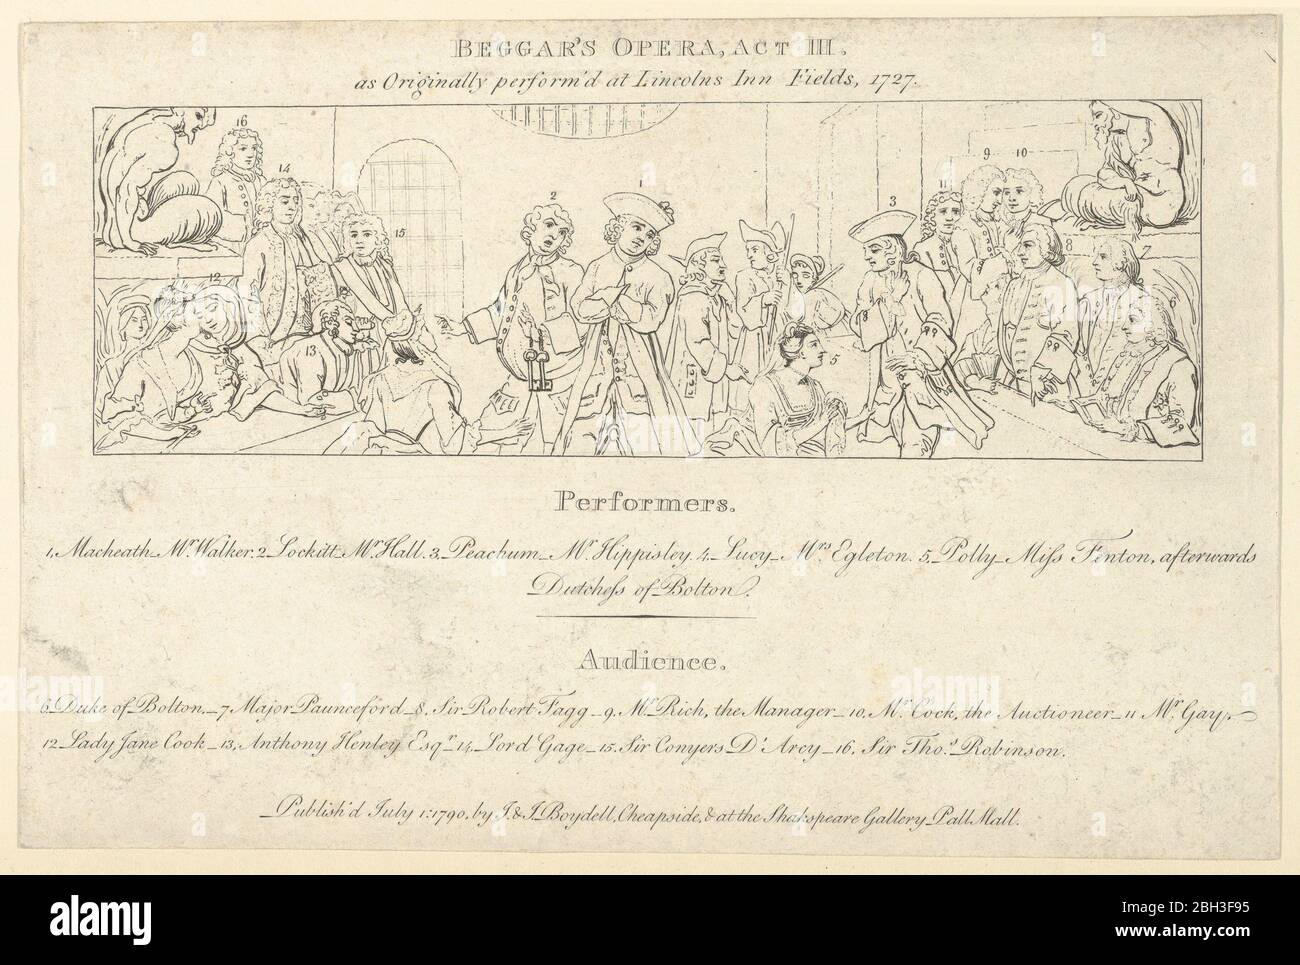 Key with List of Performers and Audience to: The Beggars Opera, July 1, 1790. Stock Photo